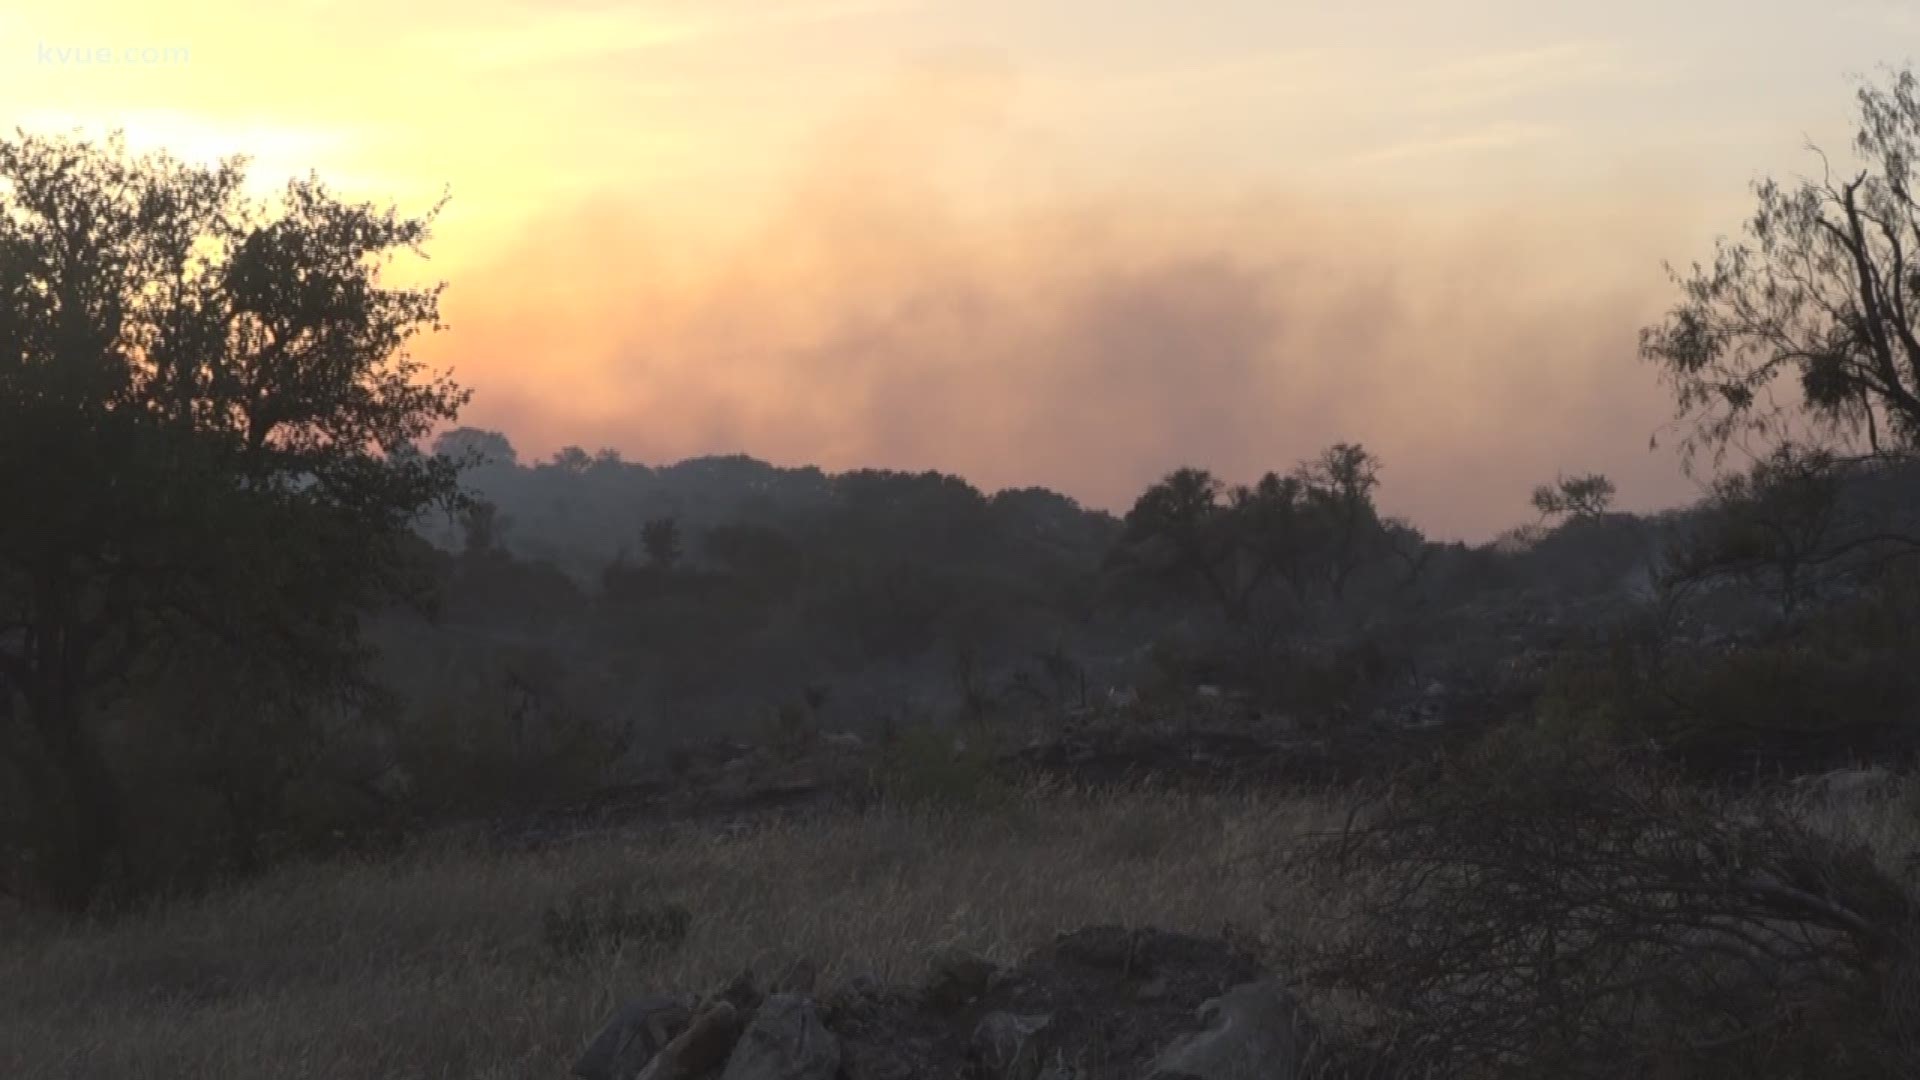 As firefighters work to contain a nearly 800-acre fire in Blanco County, firefighters are battling an 1,800 acre fire nearby in Llano County.